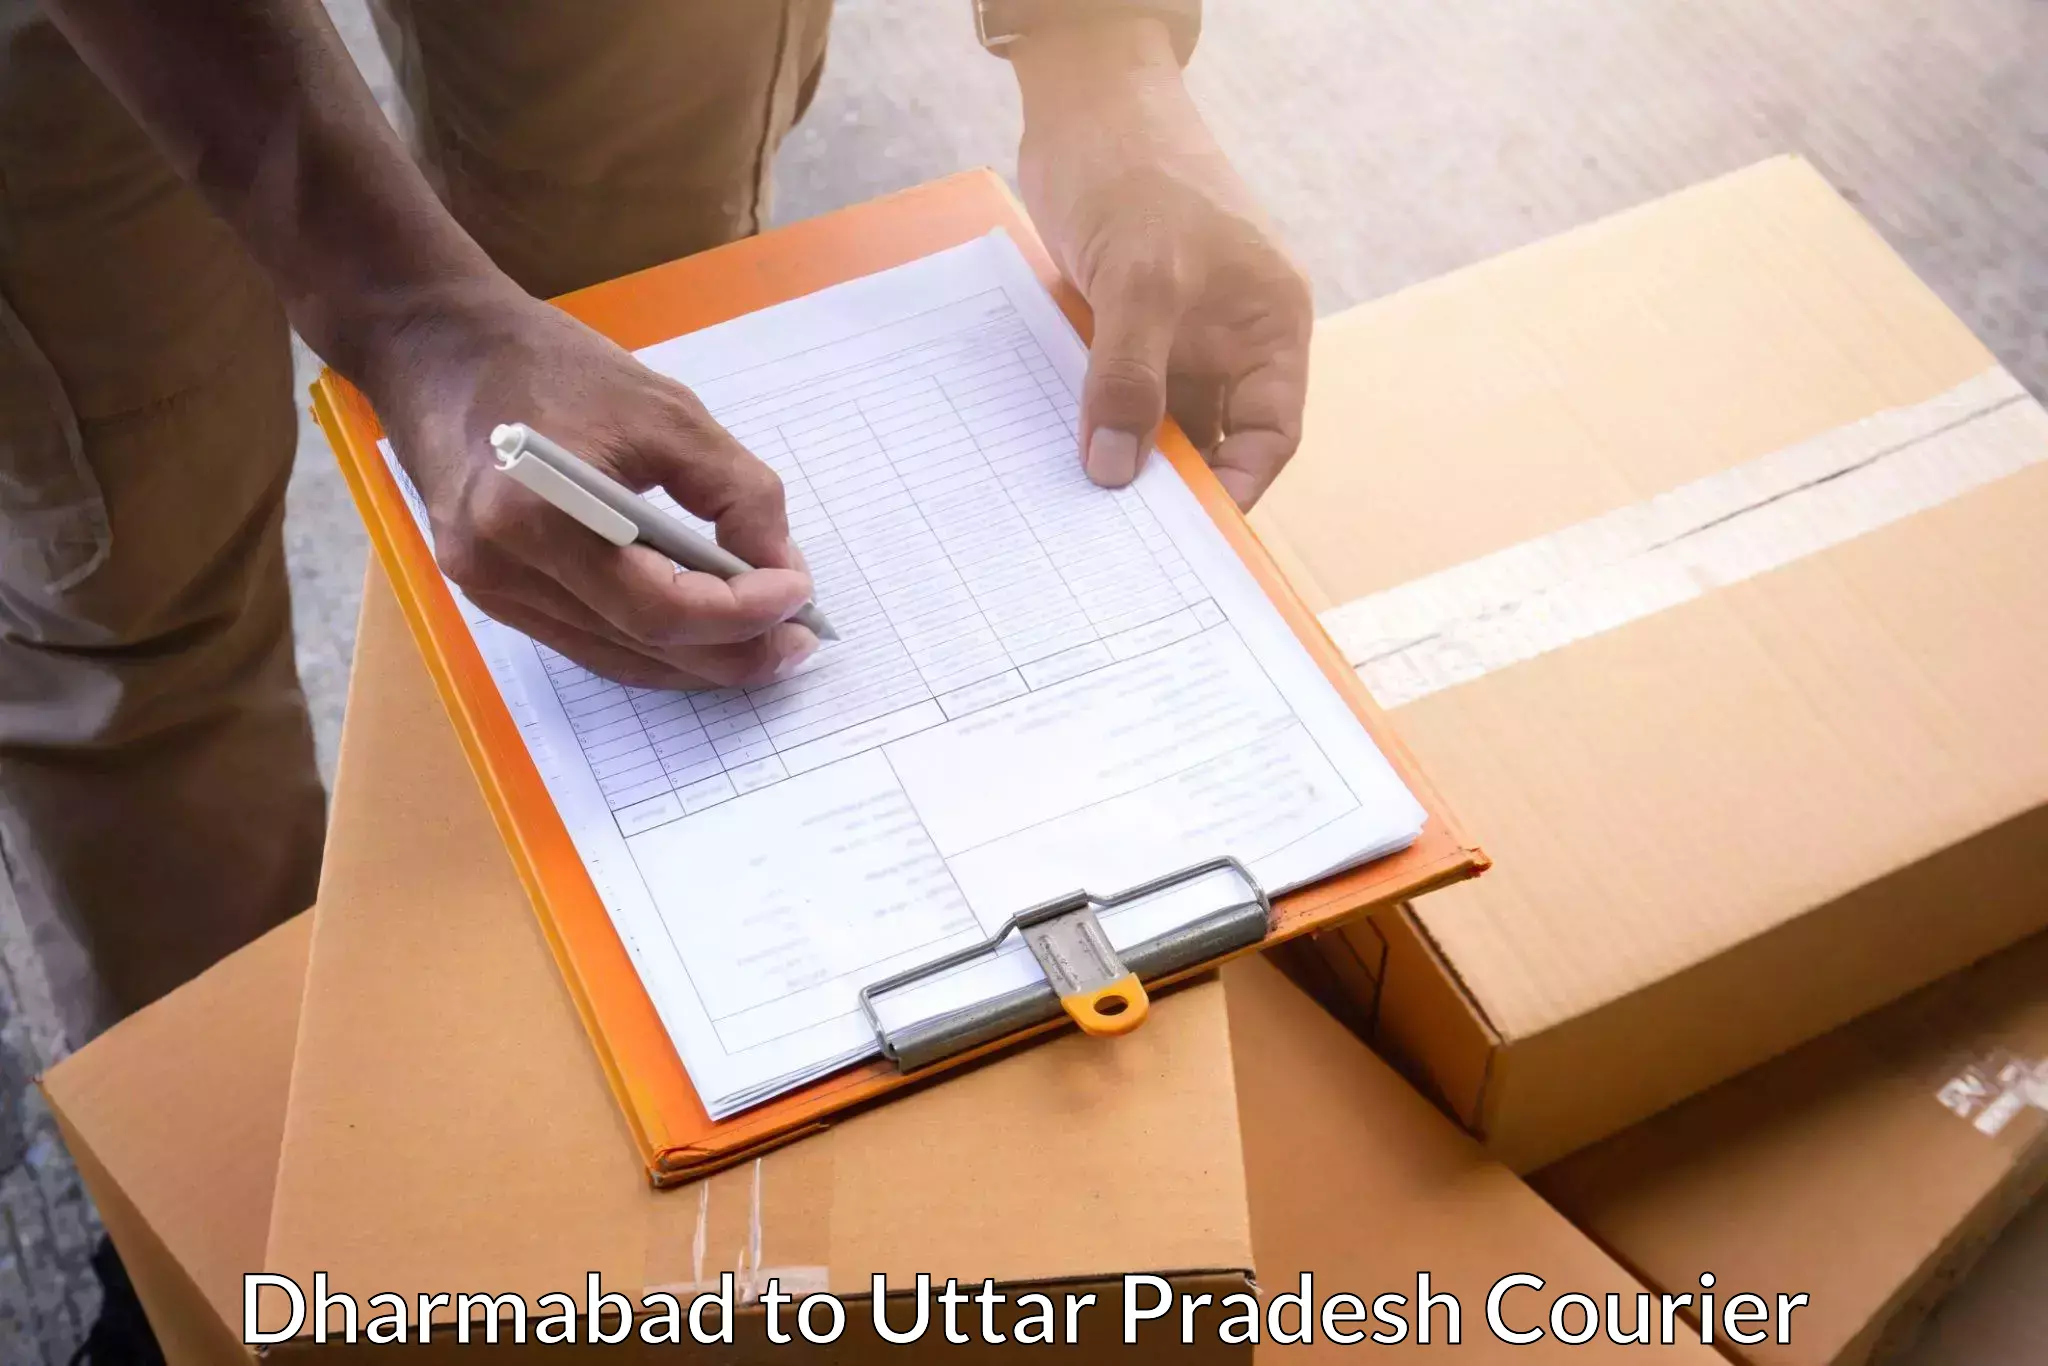 Modern courier technology Dharmabad to Anupshahar